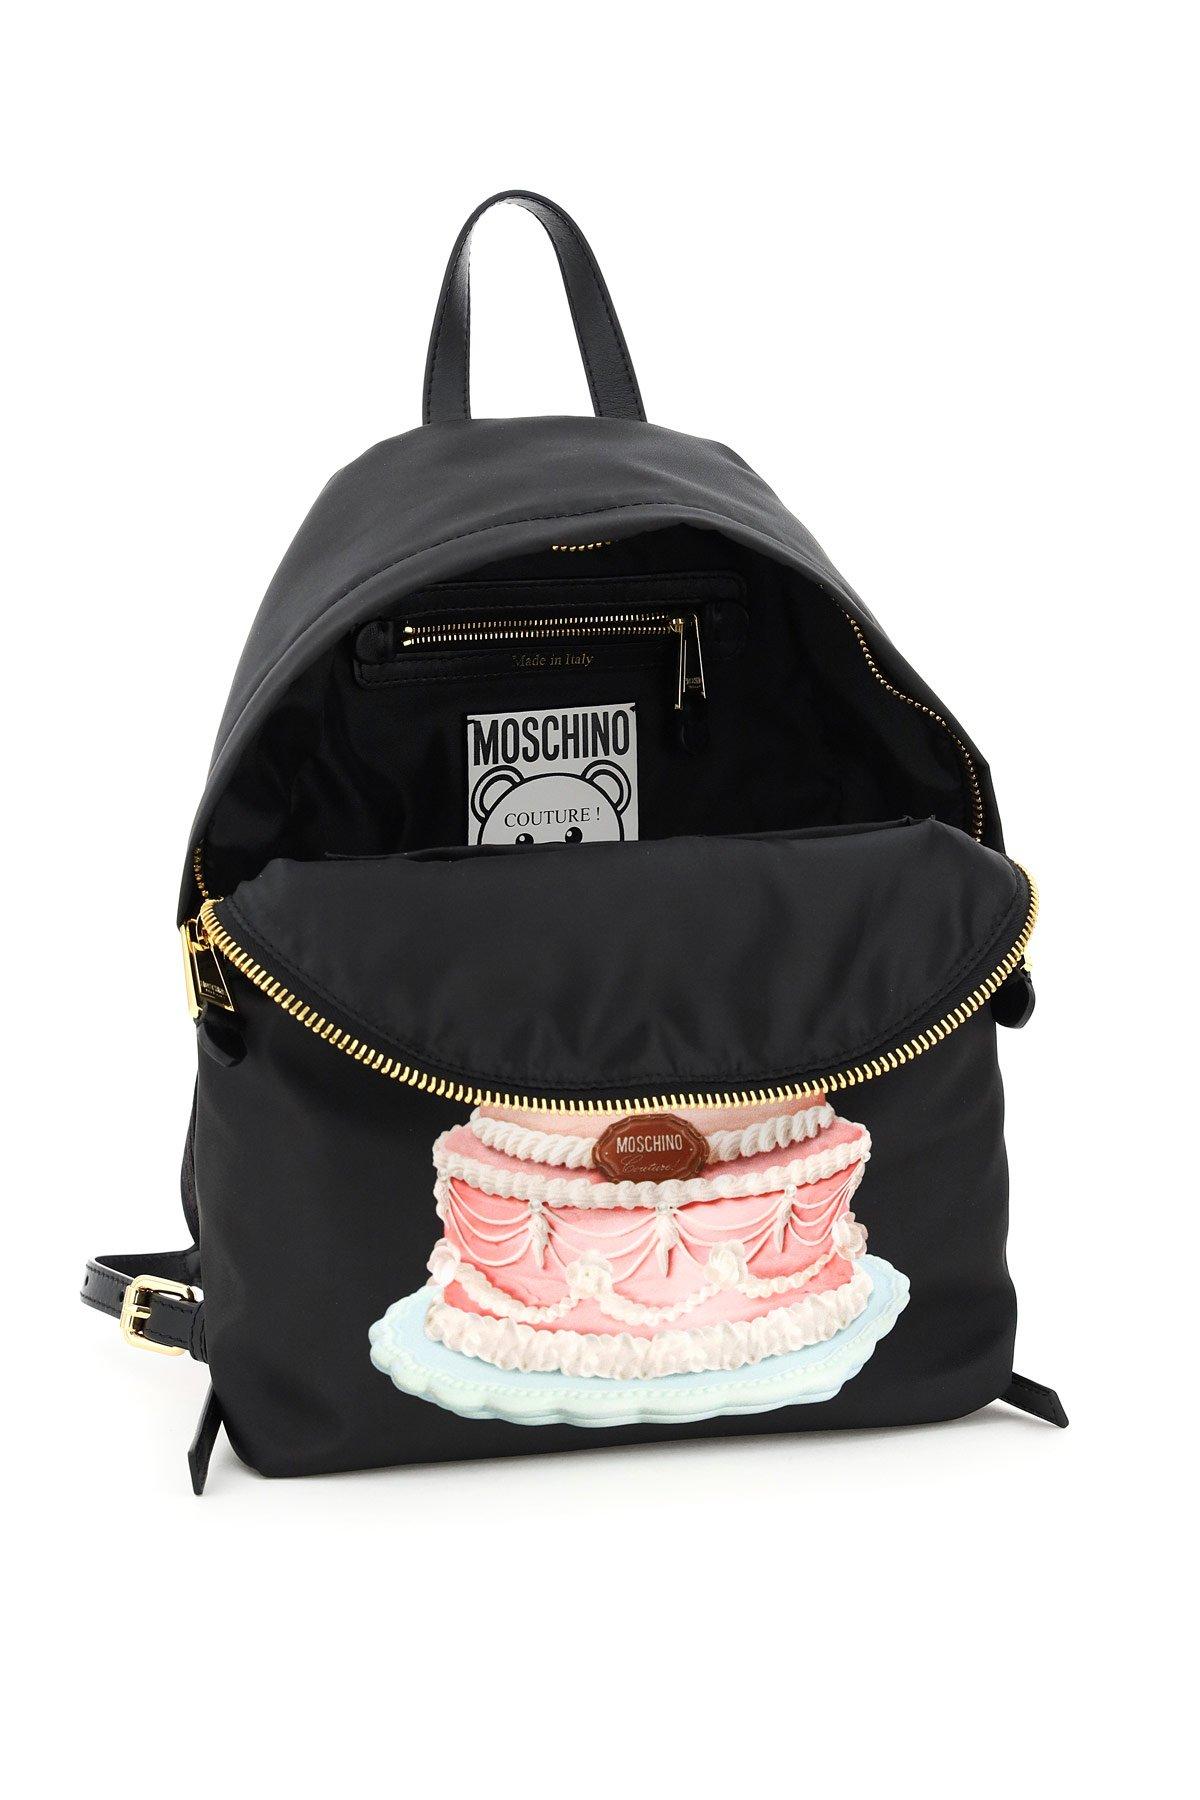 Moschino Synthetic Cake Teddy Bear Backpack in Black - Save 73% | Lyst